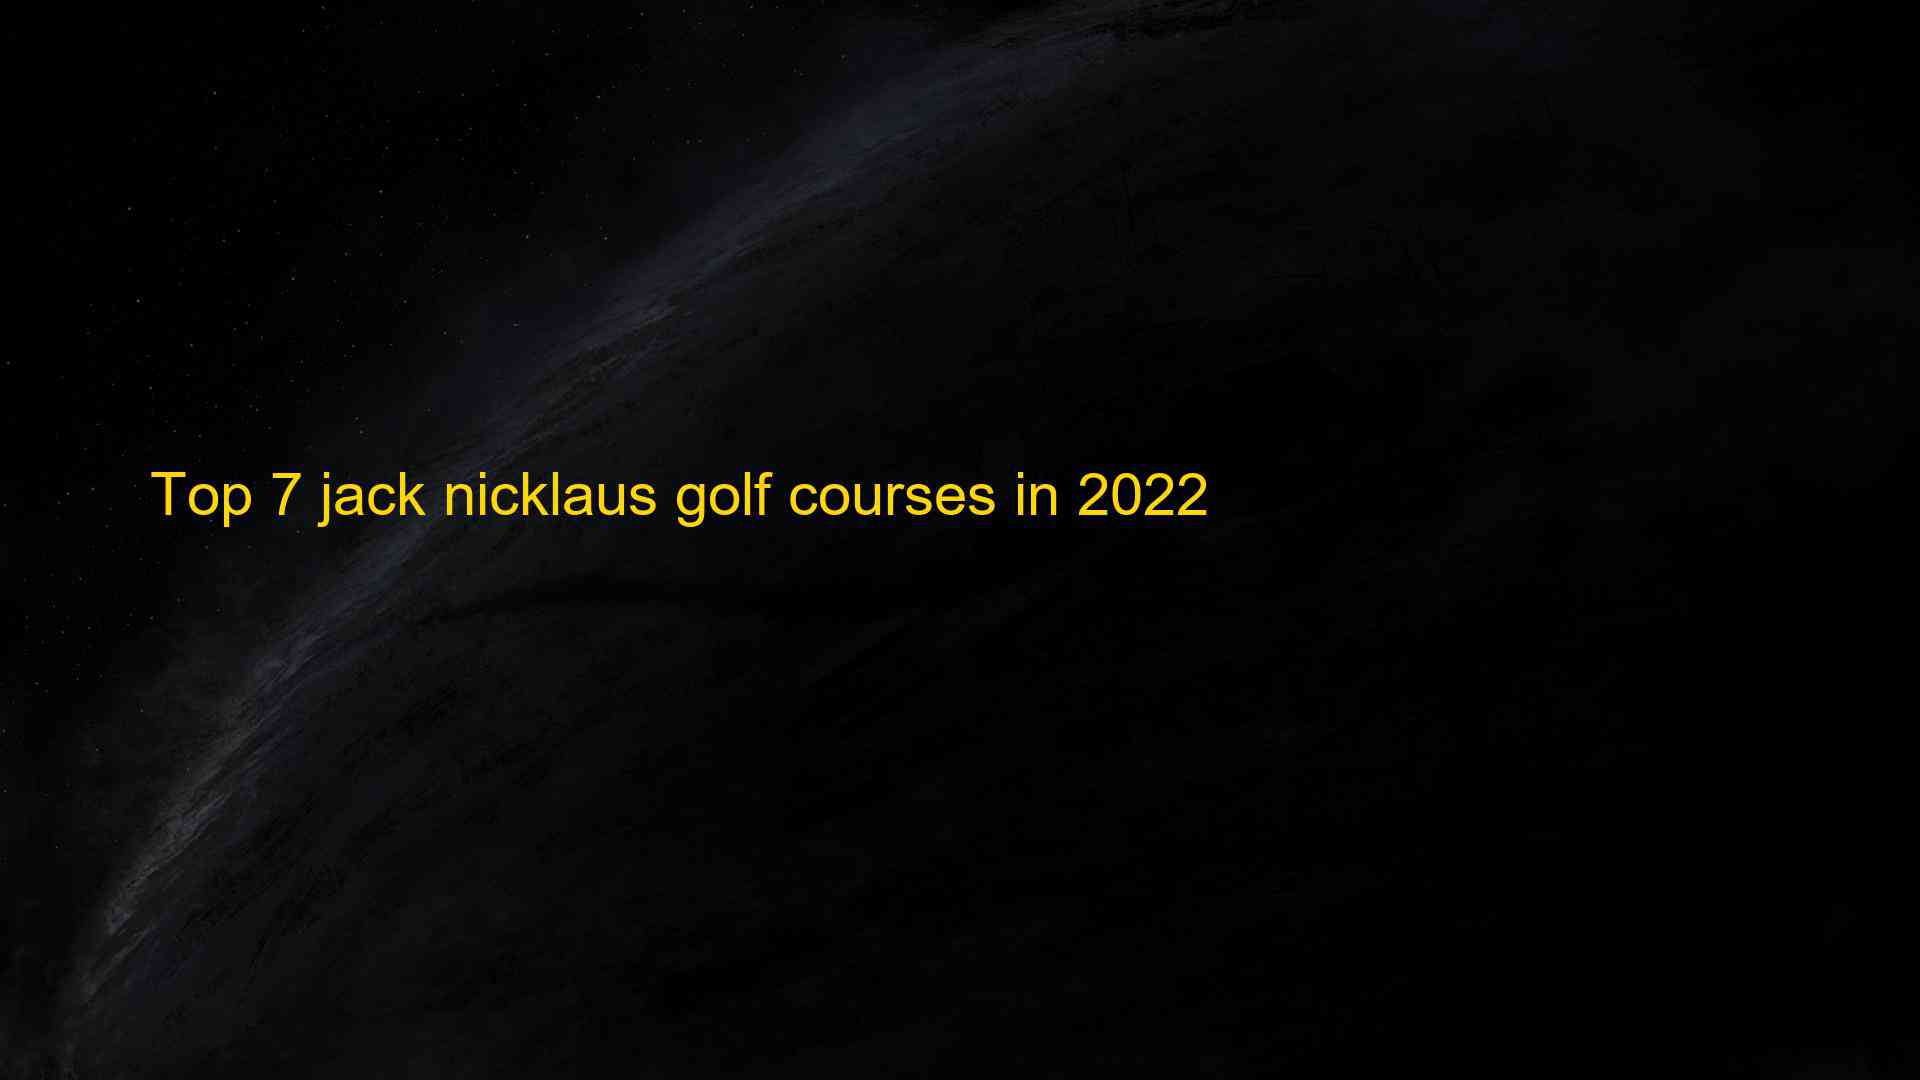 Top 7 jack nicklaus golf courses in 2022 1660893096